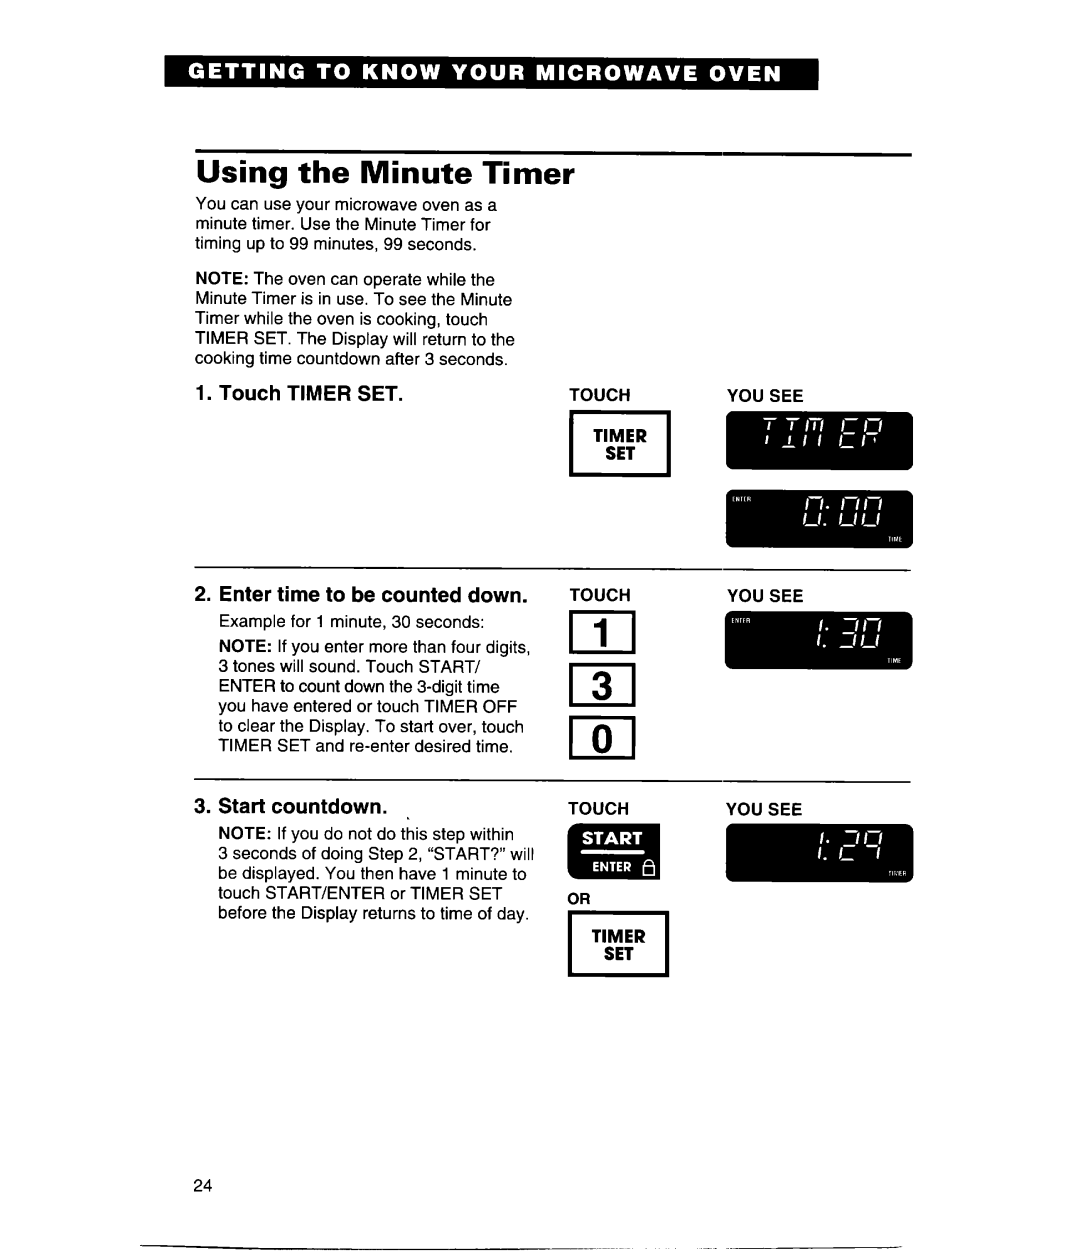 Whirlpool MH9115XE L!Ll, Using the Minute Timer, Touch TIMER SET, Enter time to be counted down, Start countdown. L 